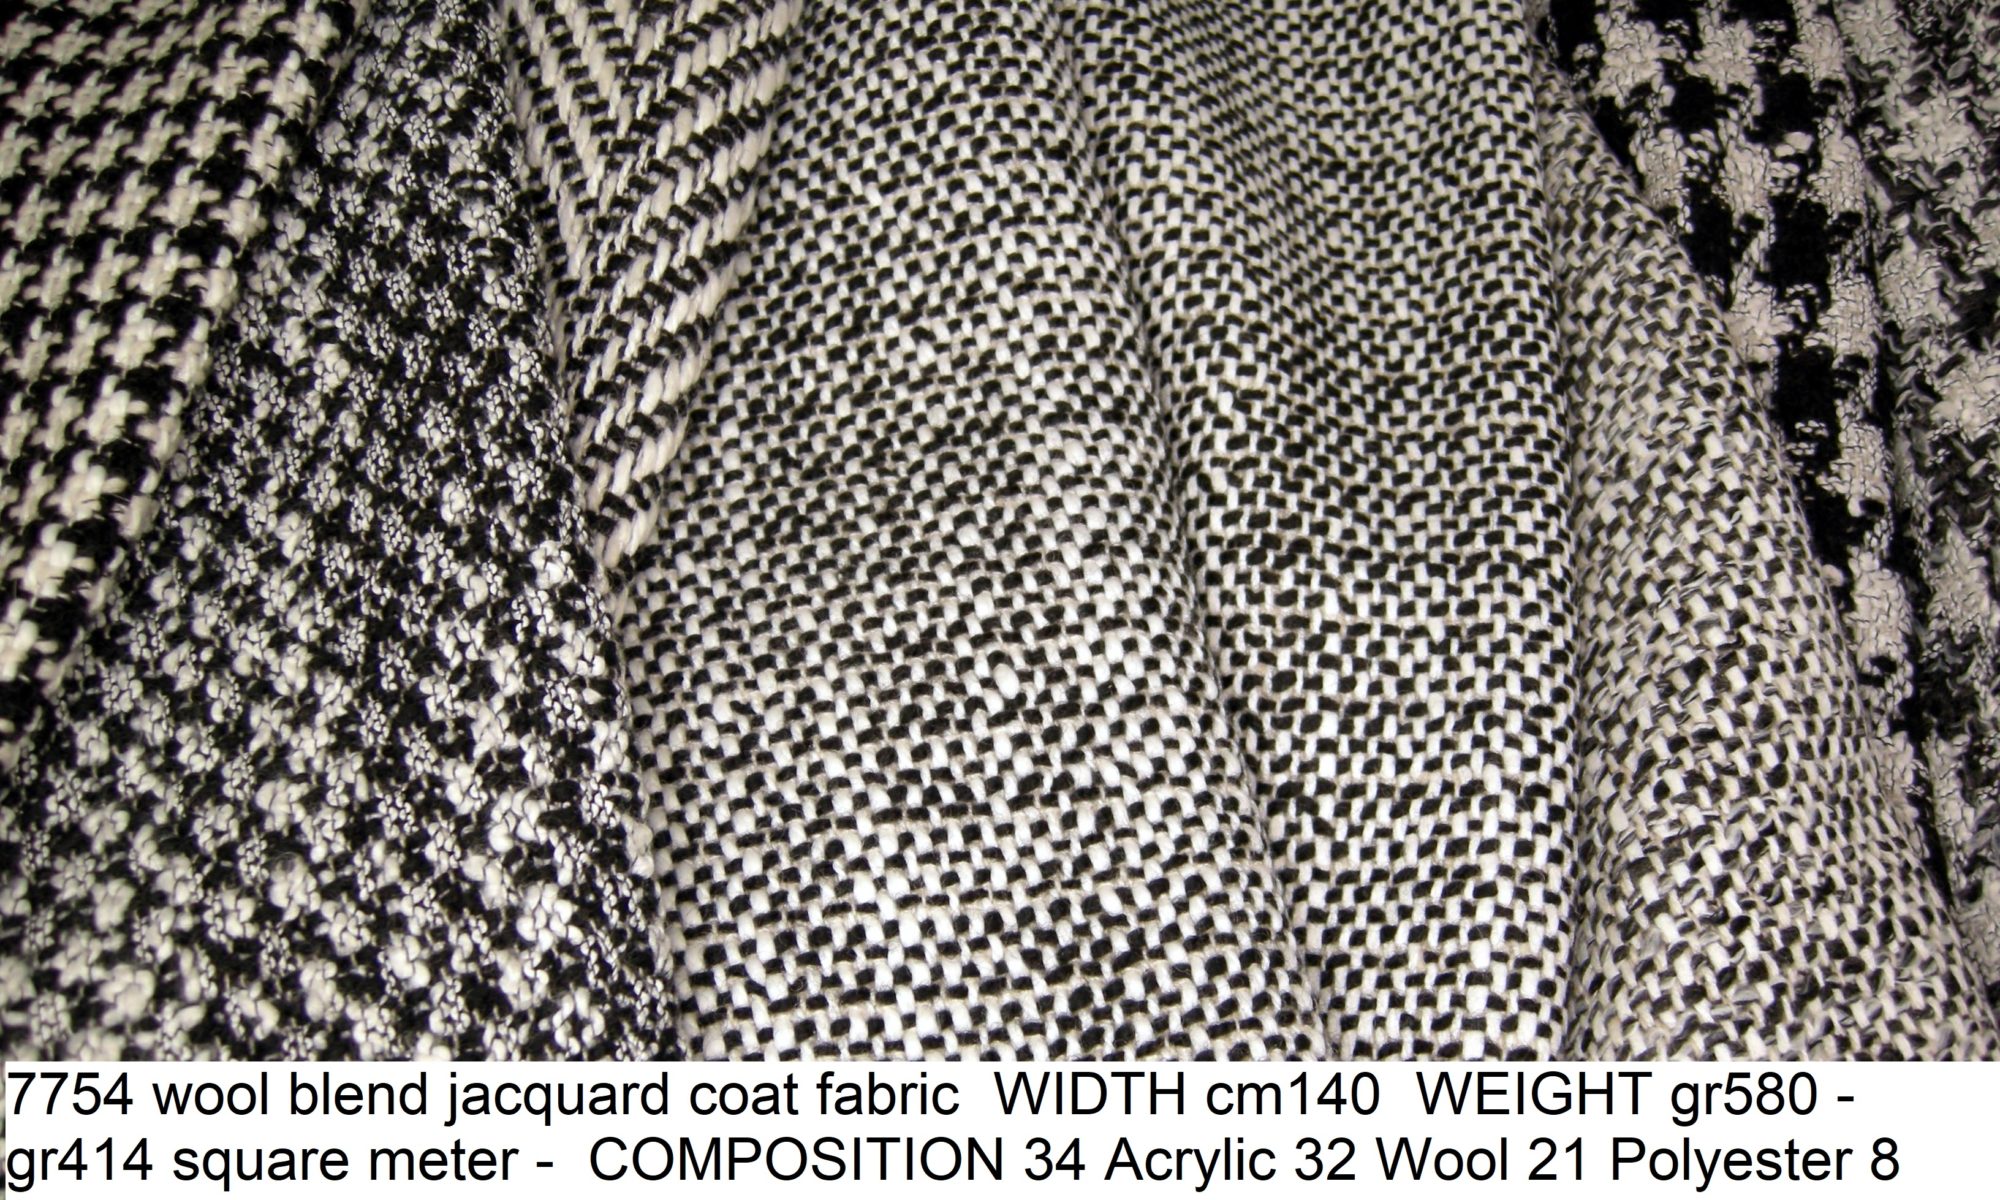 7754 wool blend jacquard coat fabric WIDTH cm140 WEIGHT gr580 - gr414 square meter - COMPOSITION 34 Acrylic 32 Wool 21 Polyester 8 Polyammide 5 others - 1